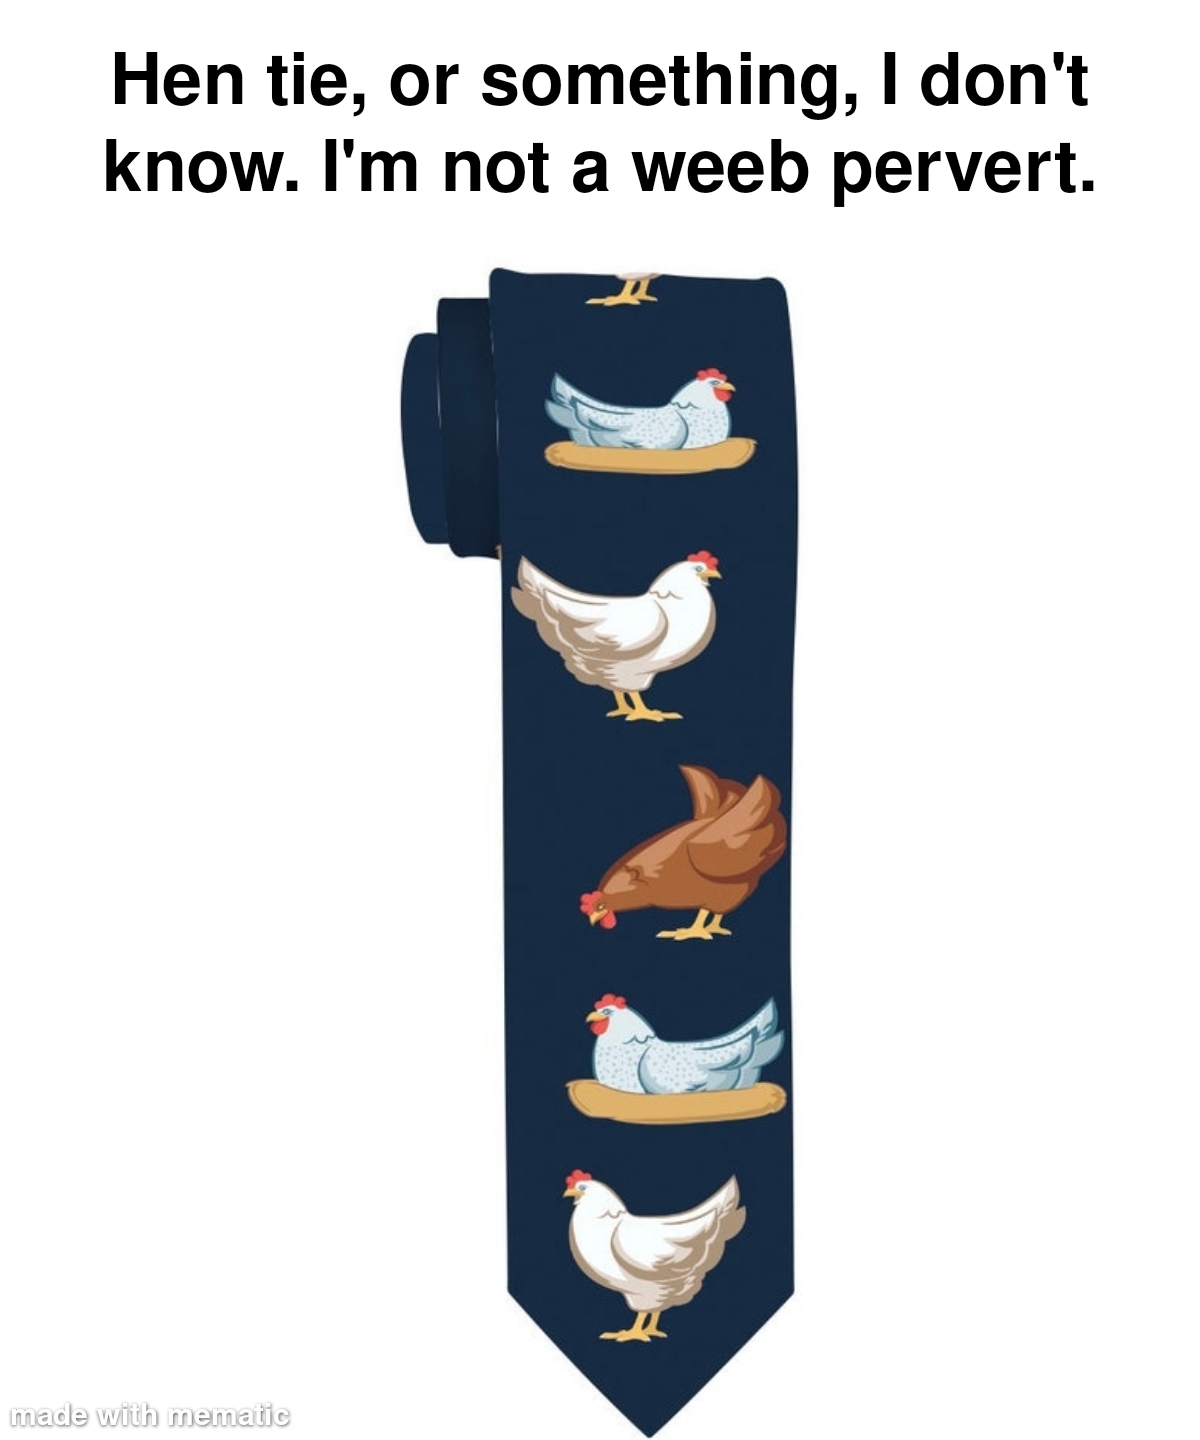 tie with chickens - Hen tie, or something, I don't know. I'm not a weeb pervert. R made with mematic